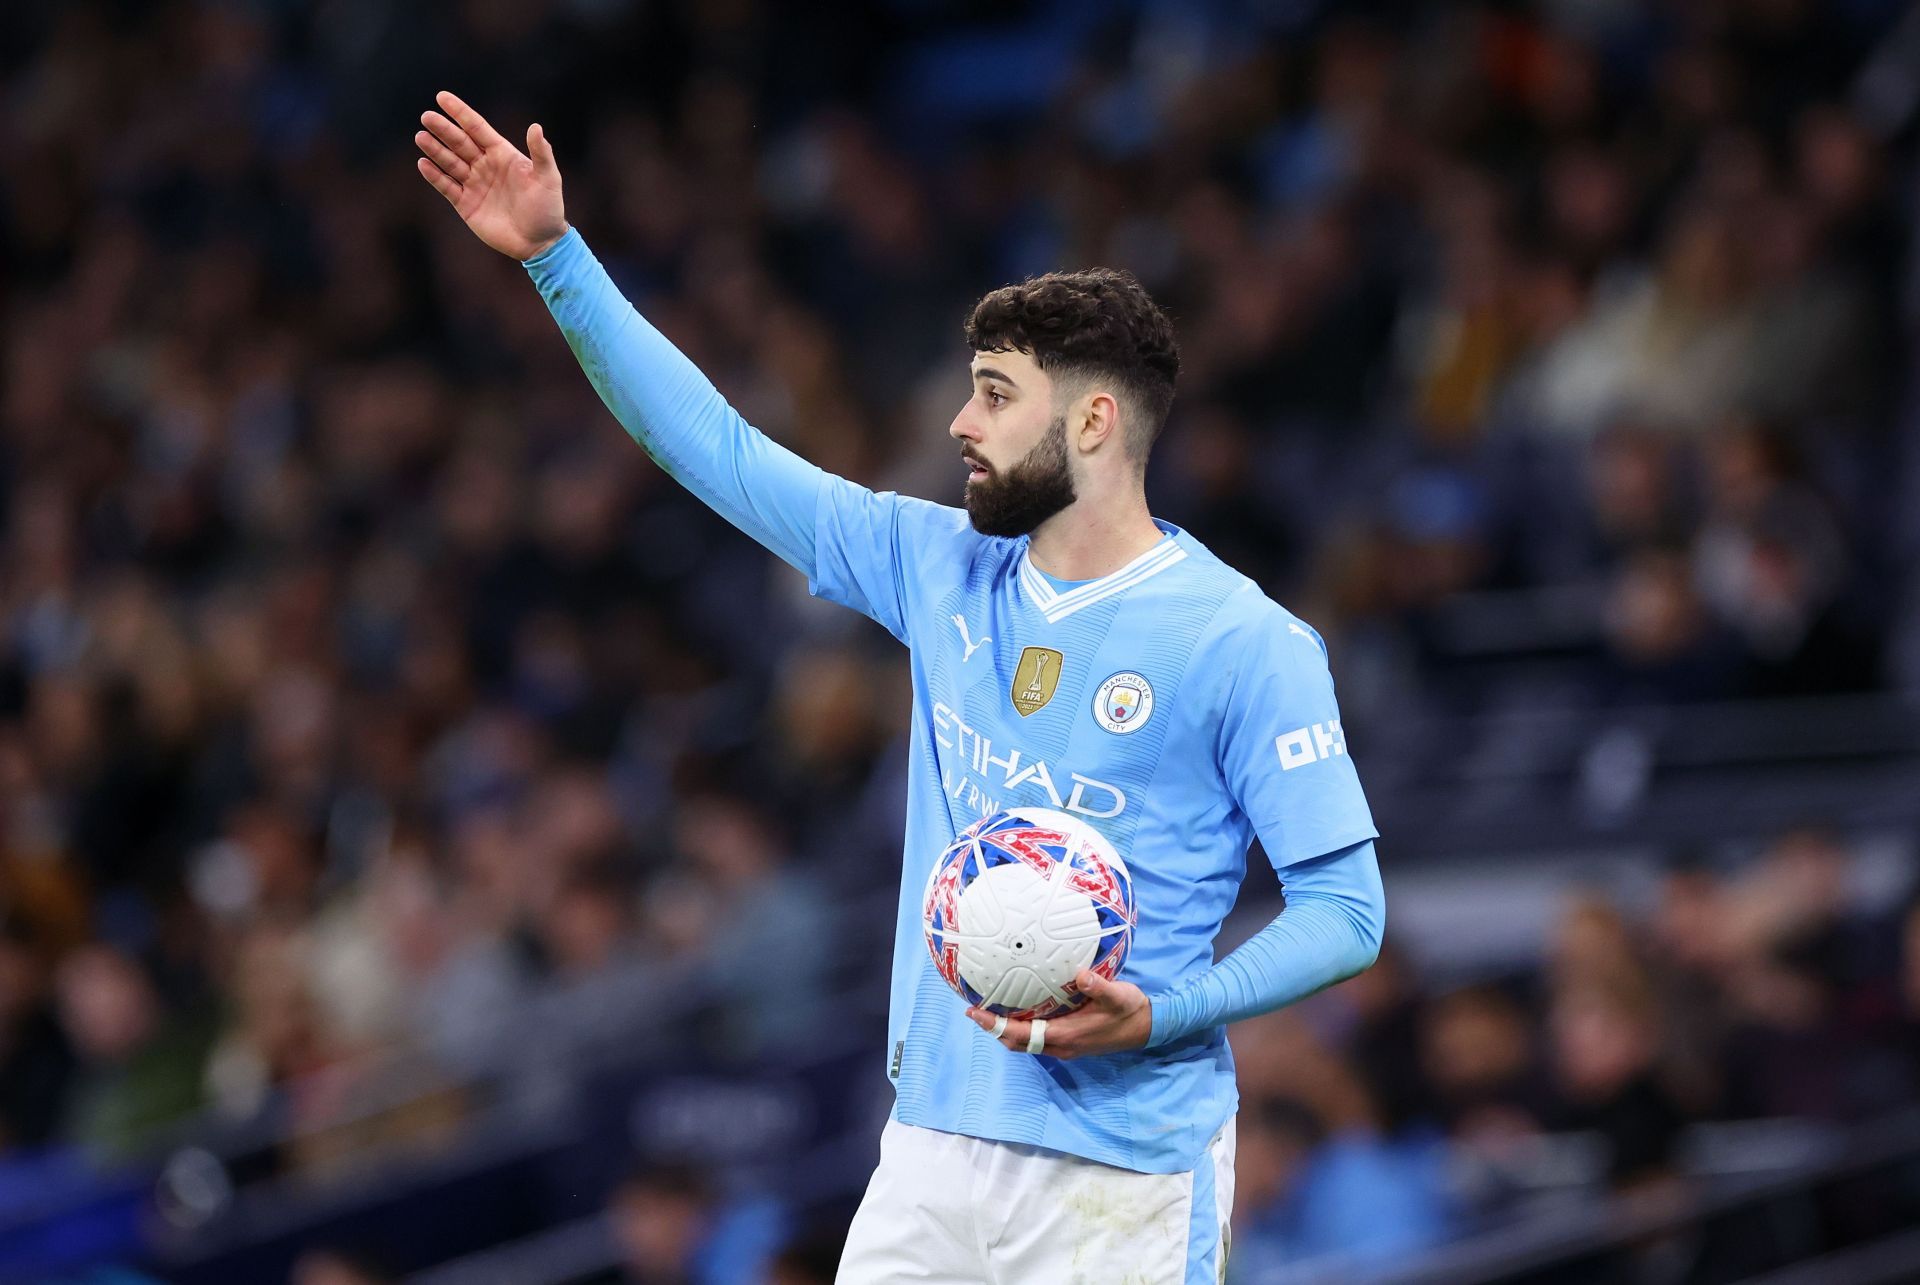 Manchester City have a brilliant defender on their hands